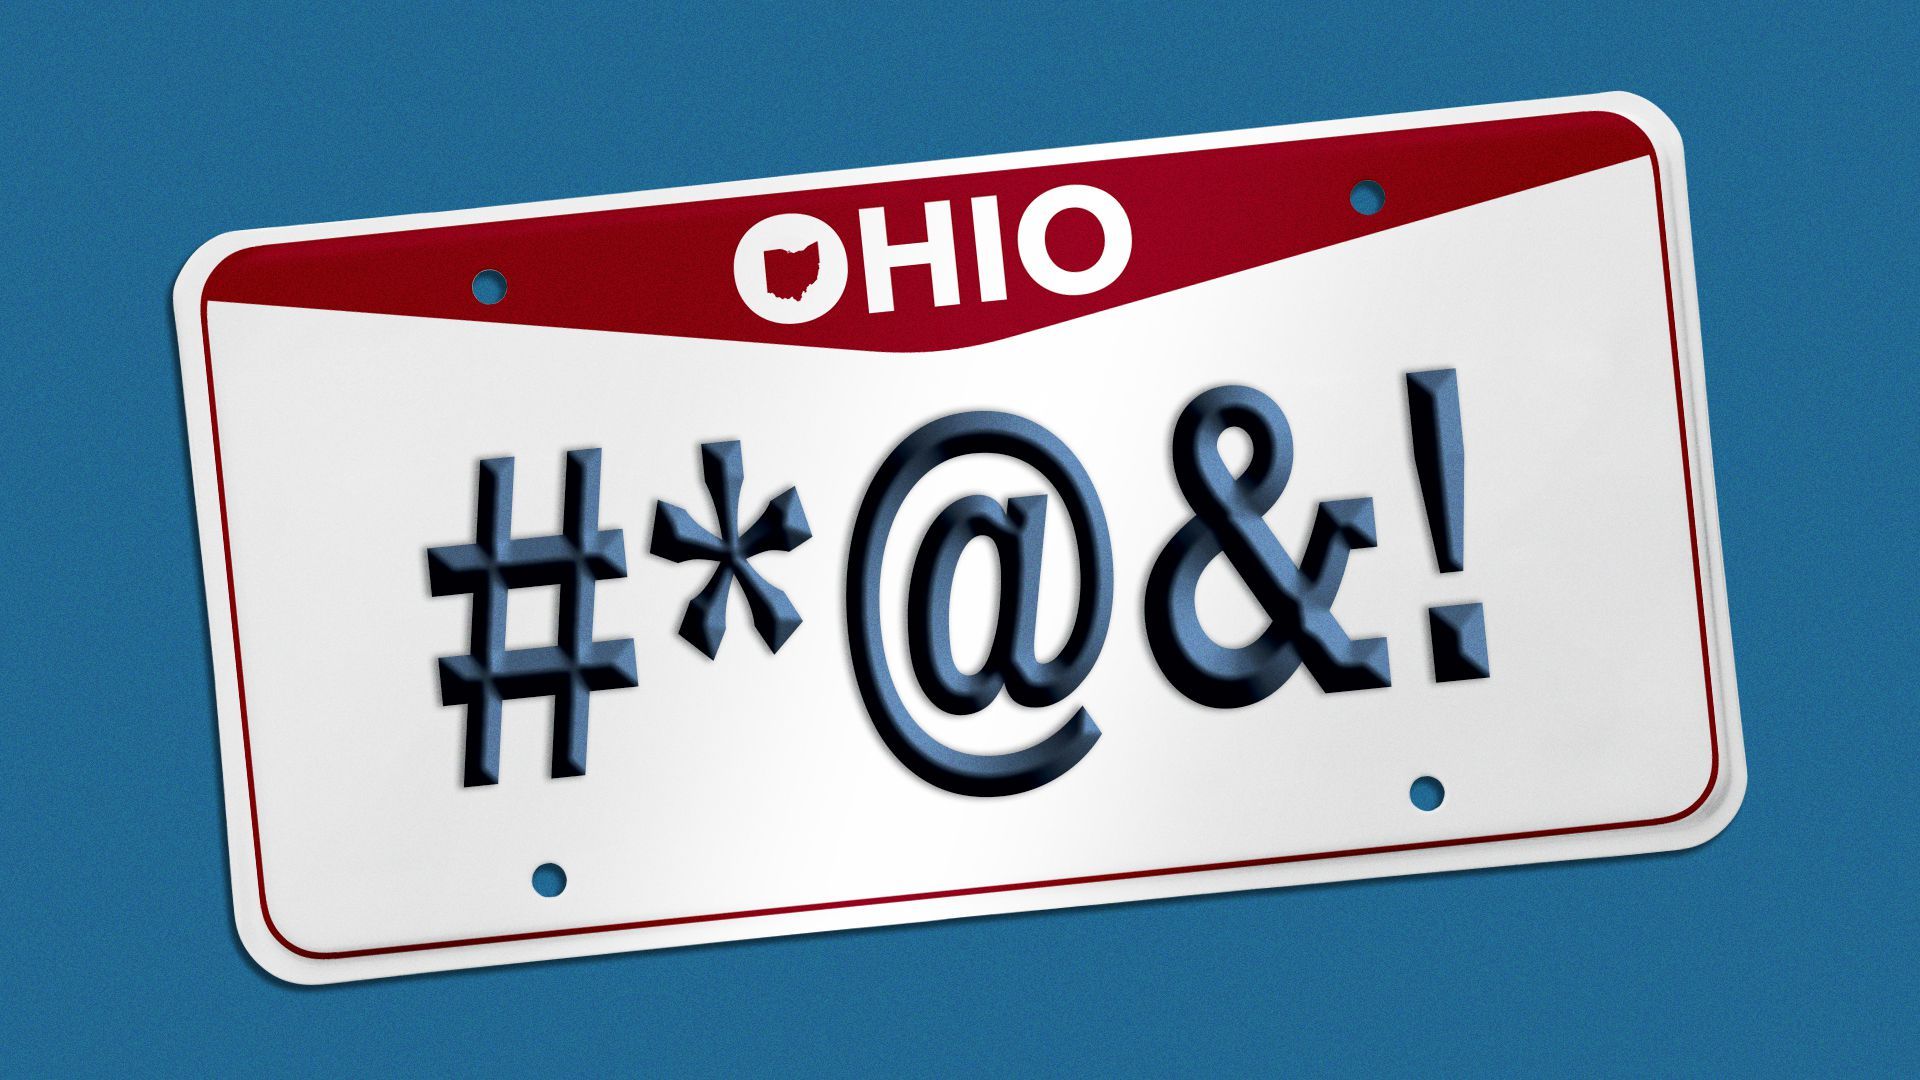 Illustration of an Ohio vanity license plate with symbols implying a swear word.